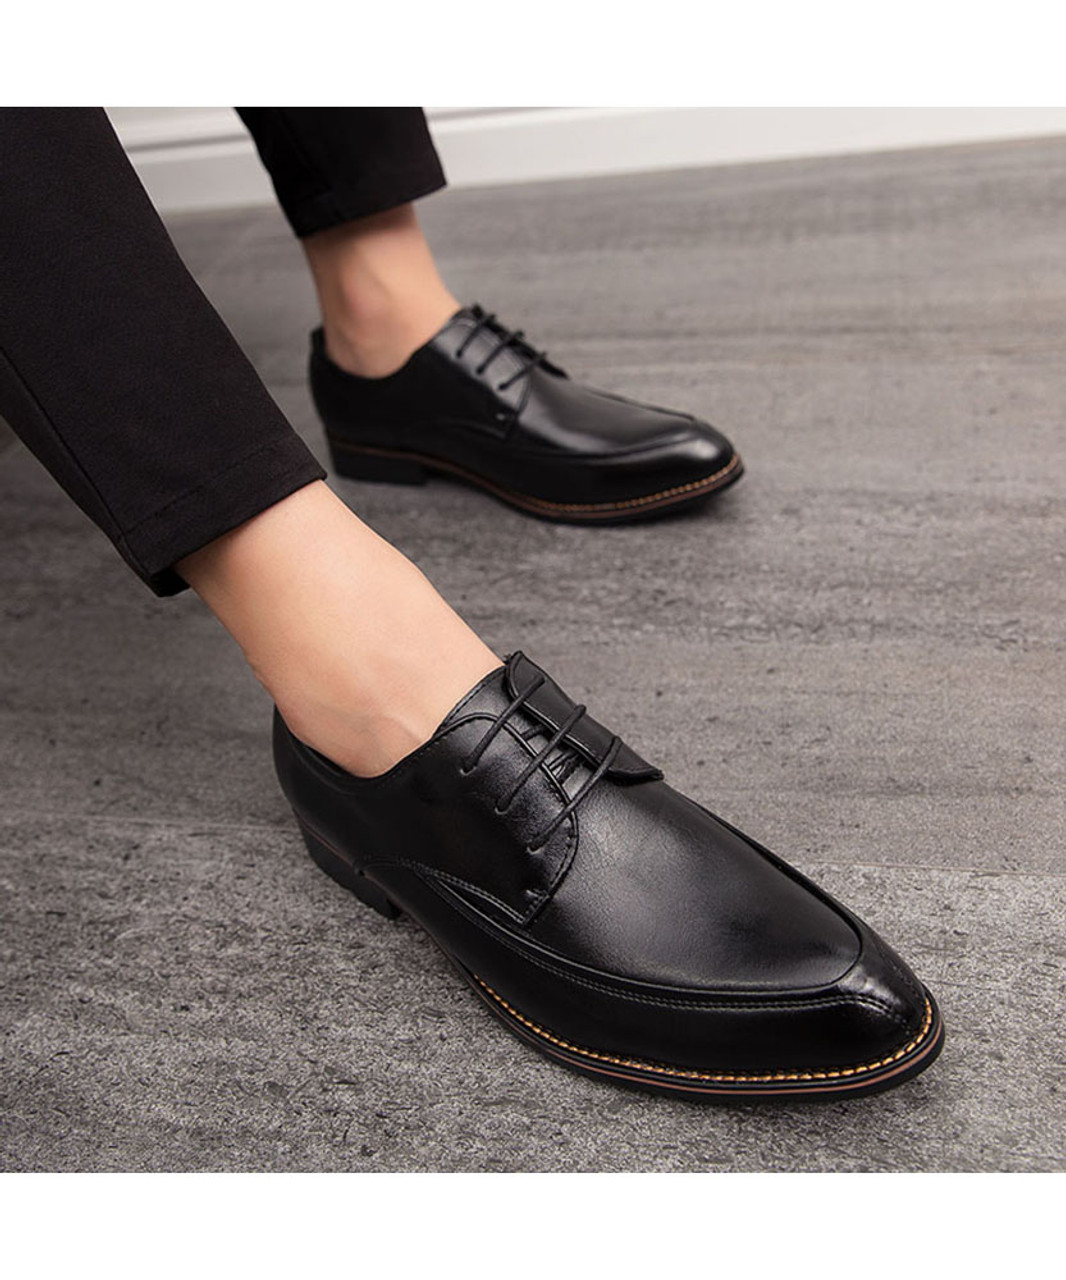 Black sewed style leather derby dress shoe | Mens dress shoes online 1960MS